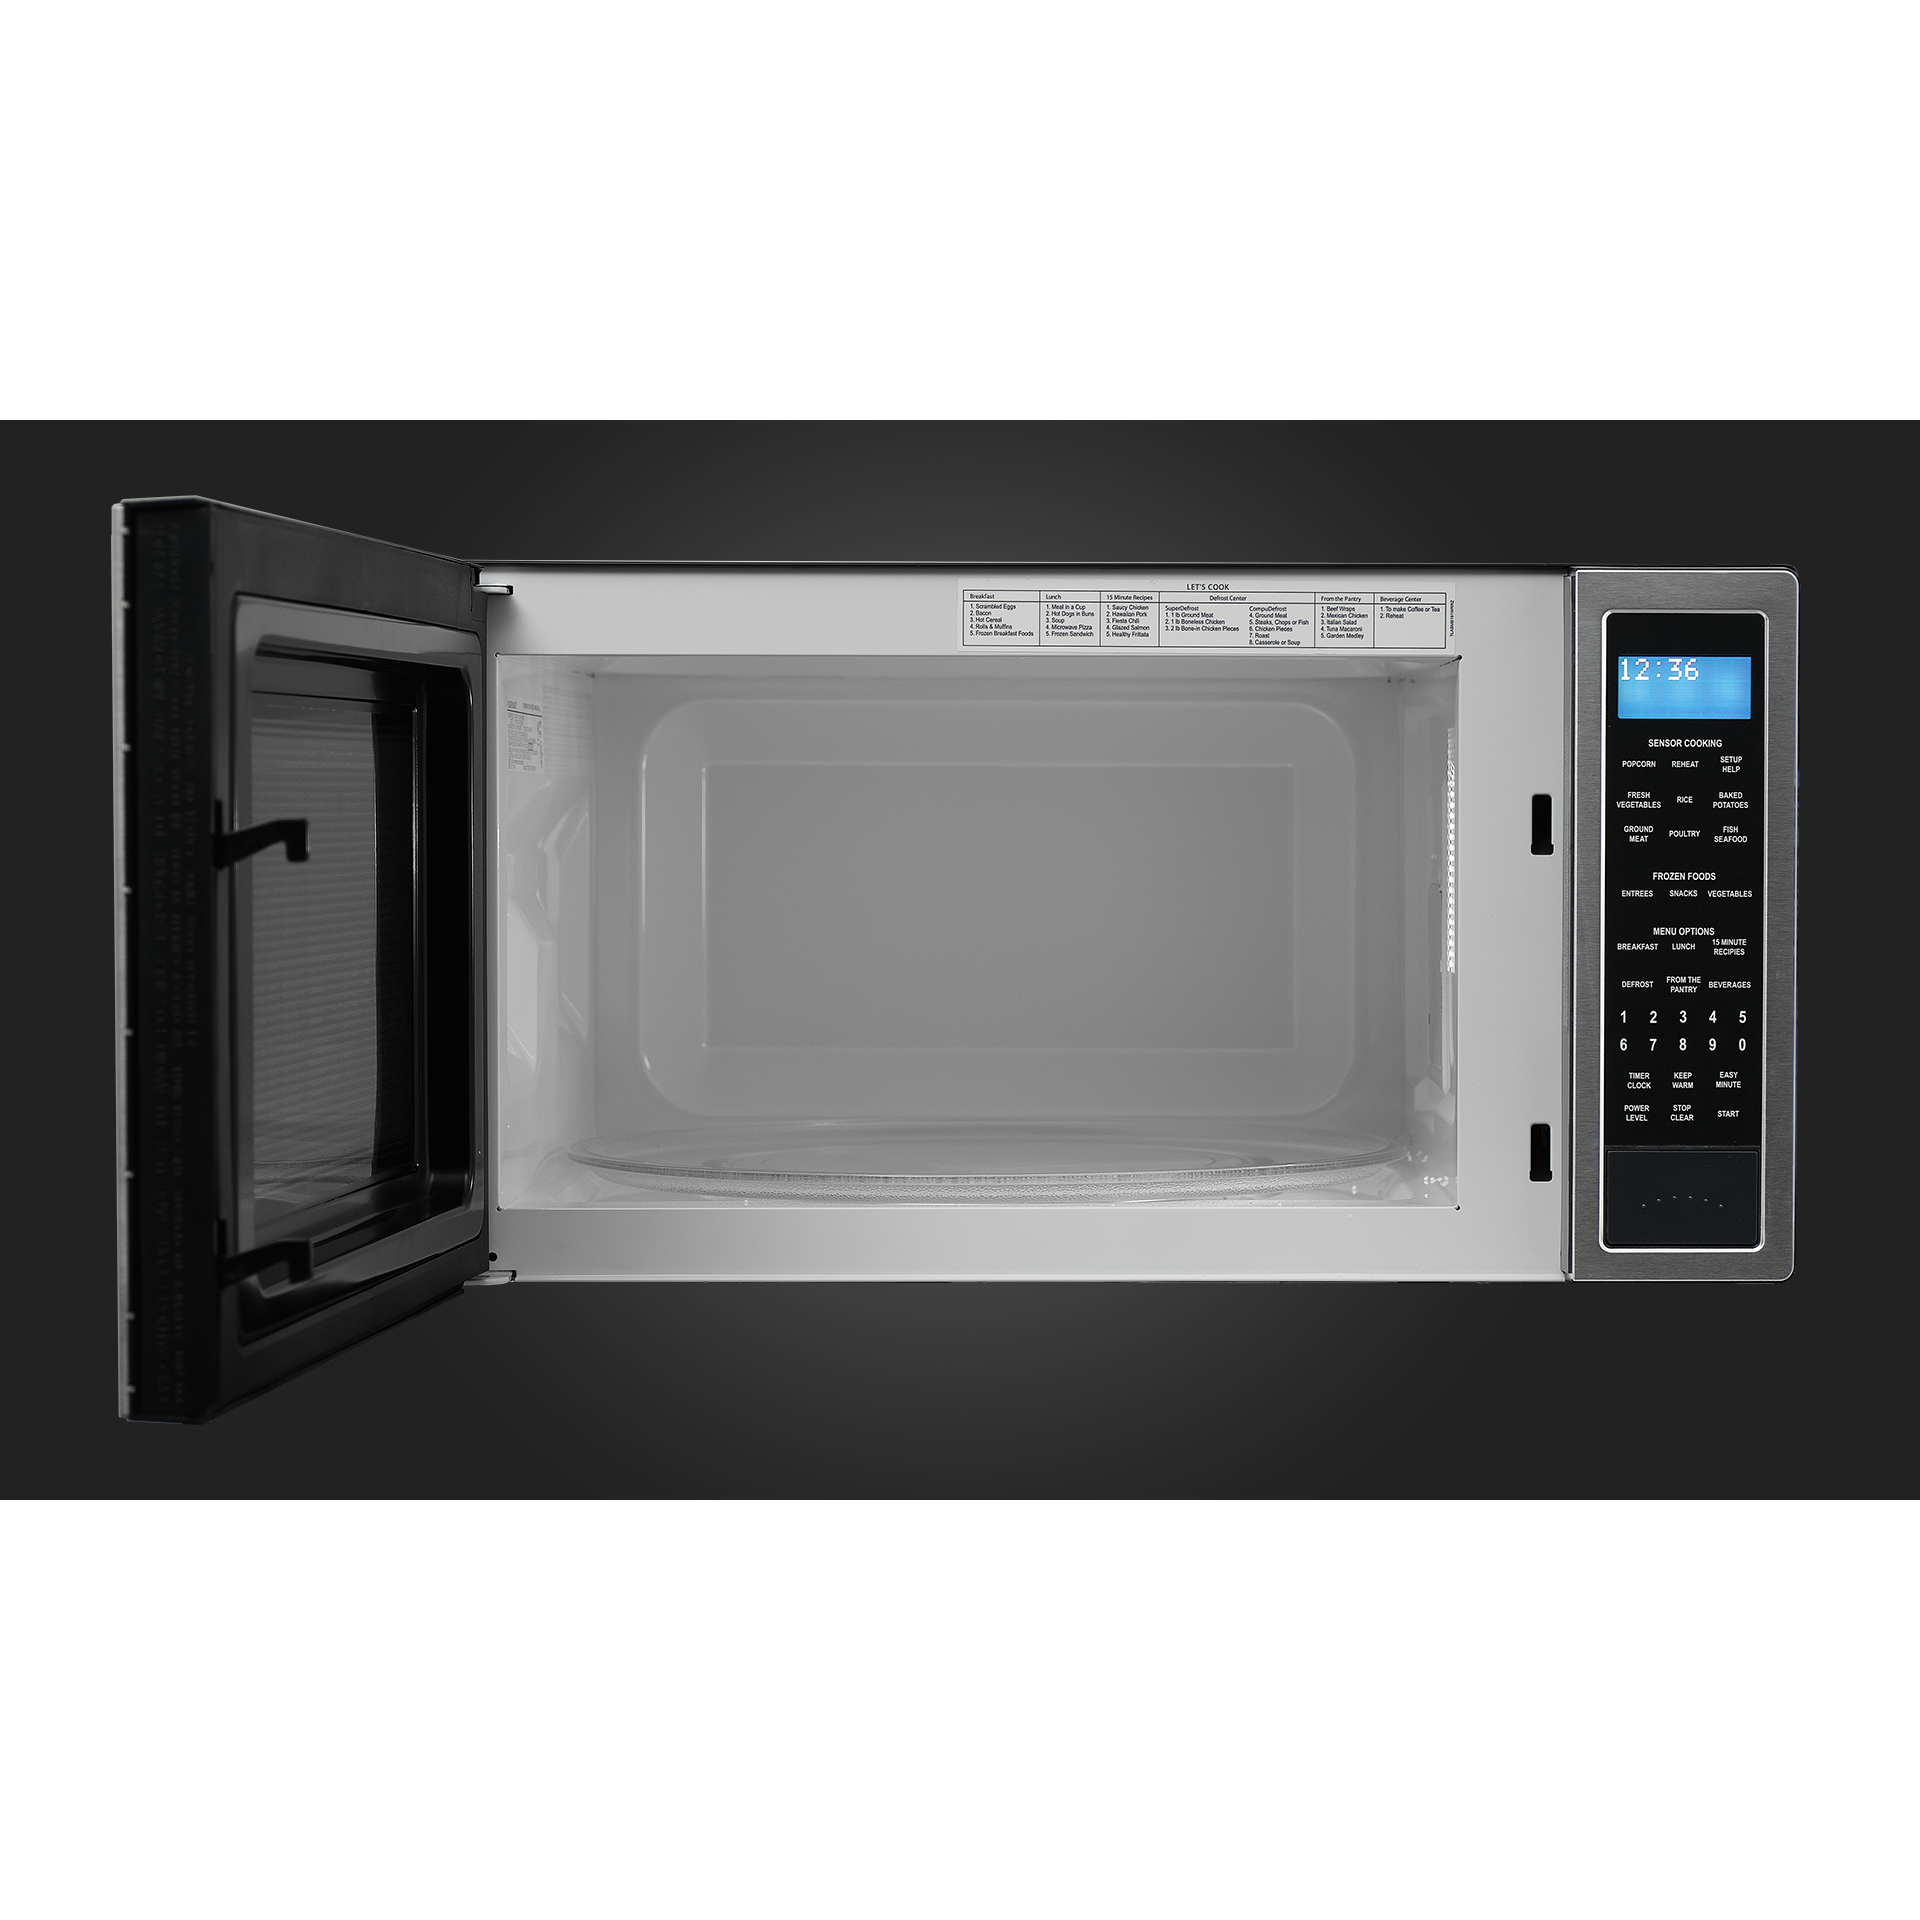 Fulgor Milano 24" Countertop Microwave Oven with 2.0 Cu. Ft. Capacity, Stainless Steel - F4MWO24S1